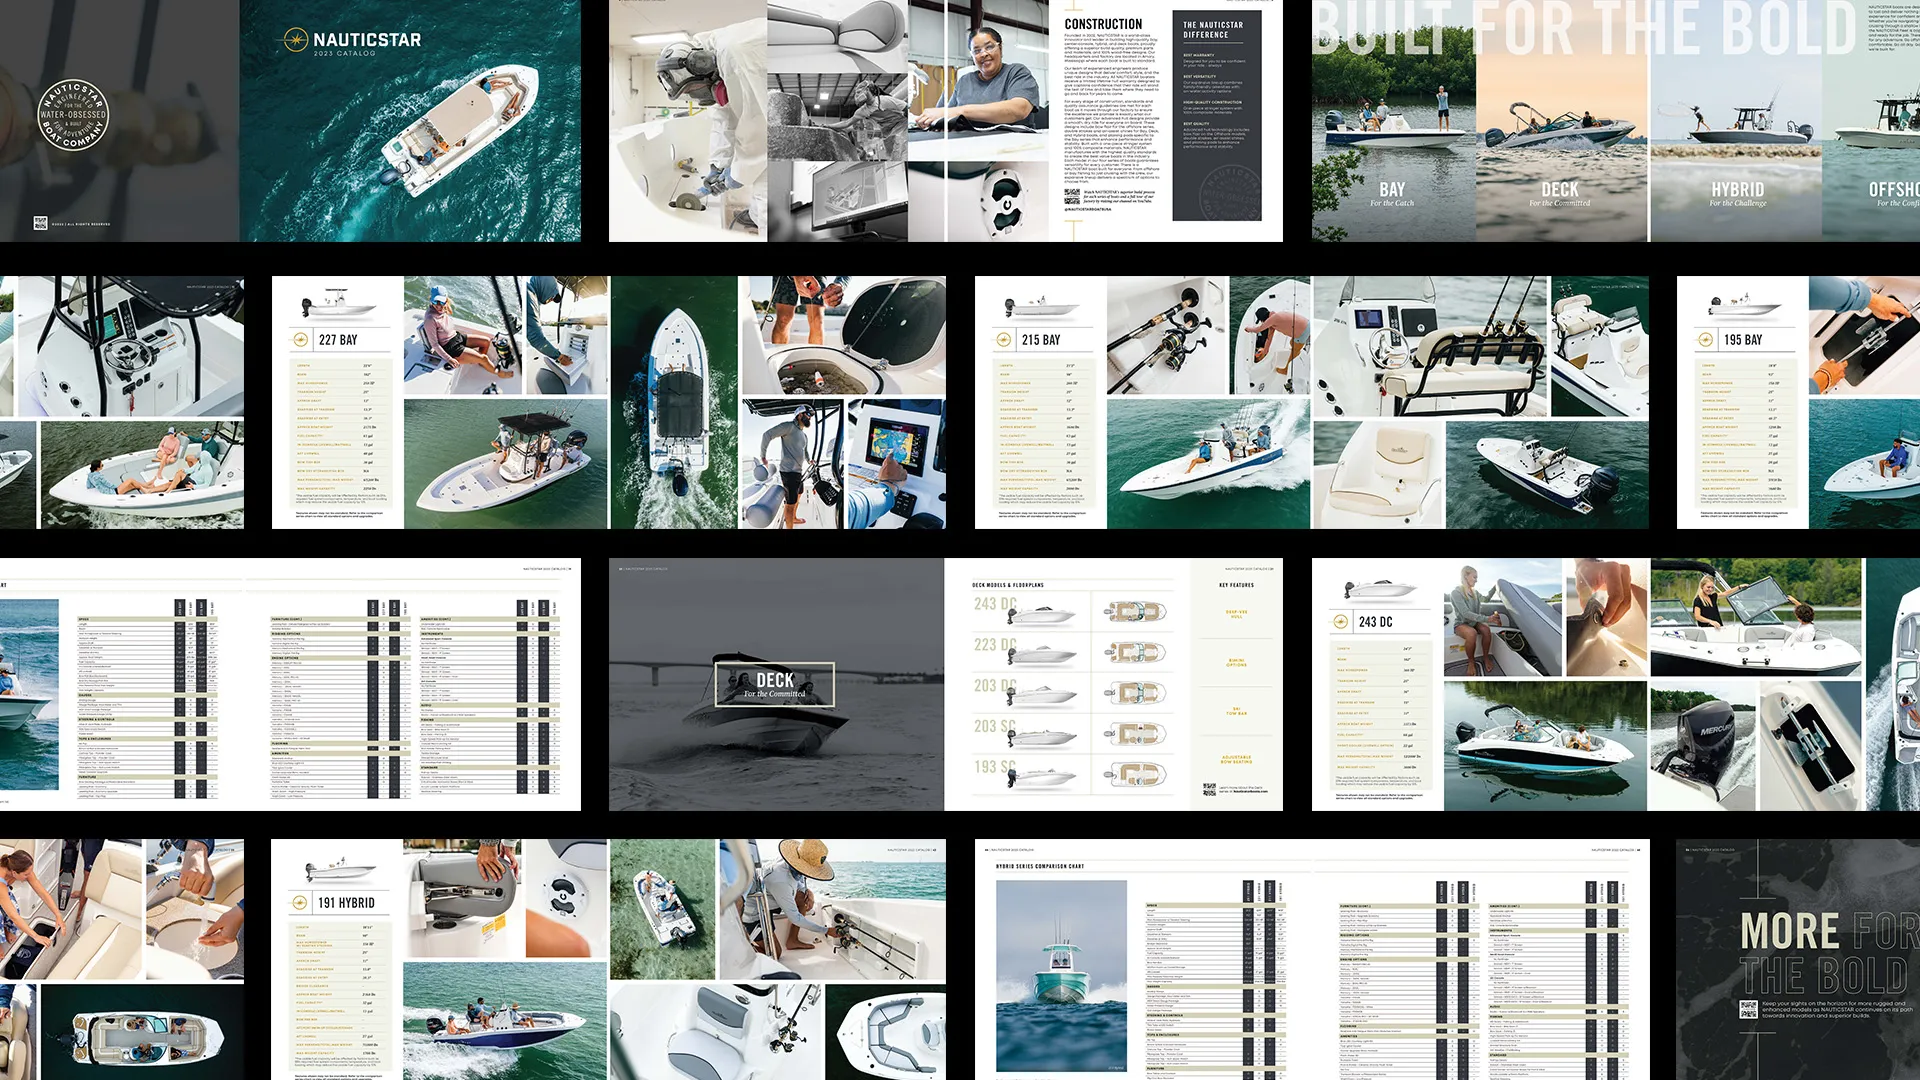 Collage of Nauticstar boats publicity content